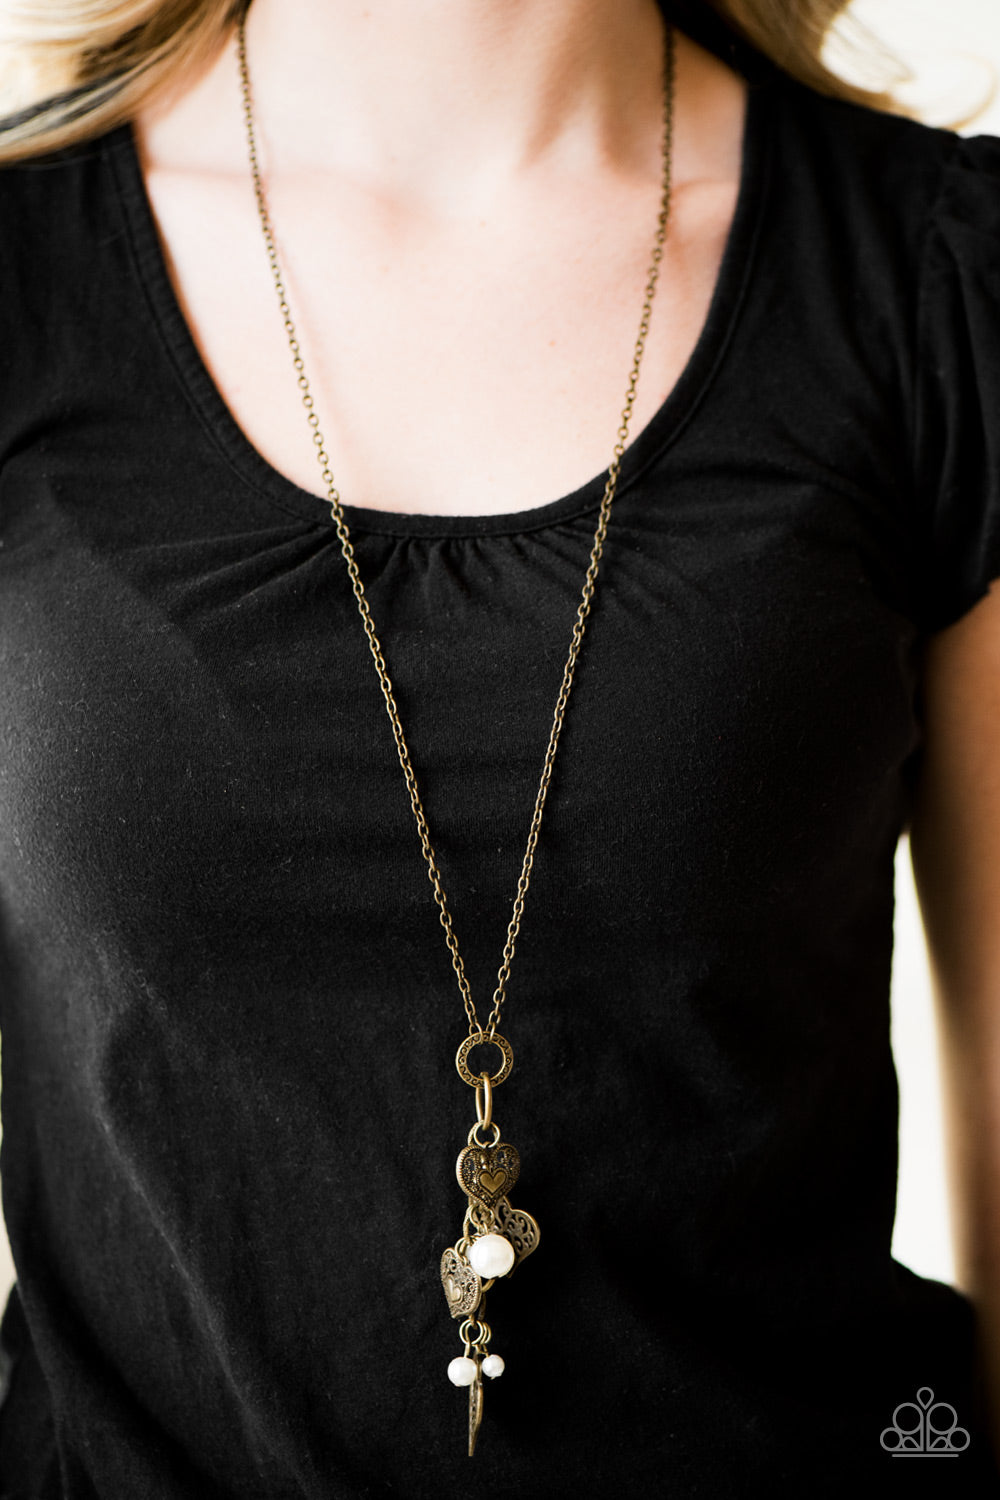 Take the Plunge - brass - Paparazzi necklace